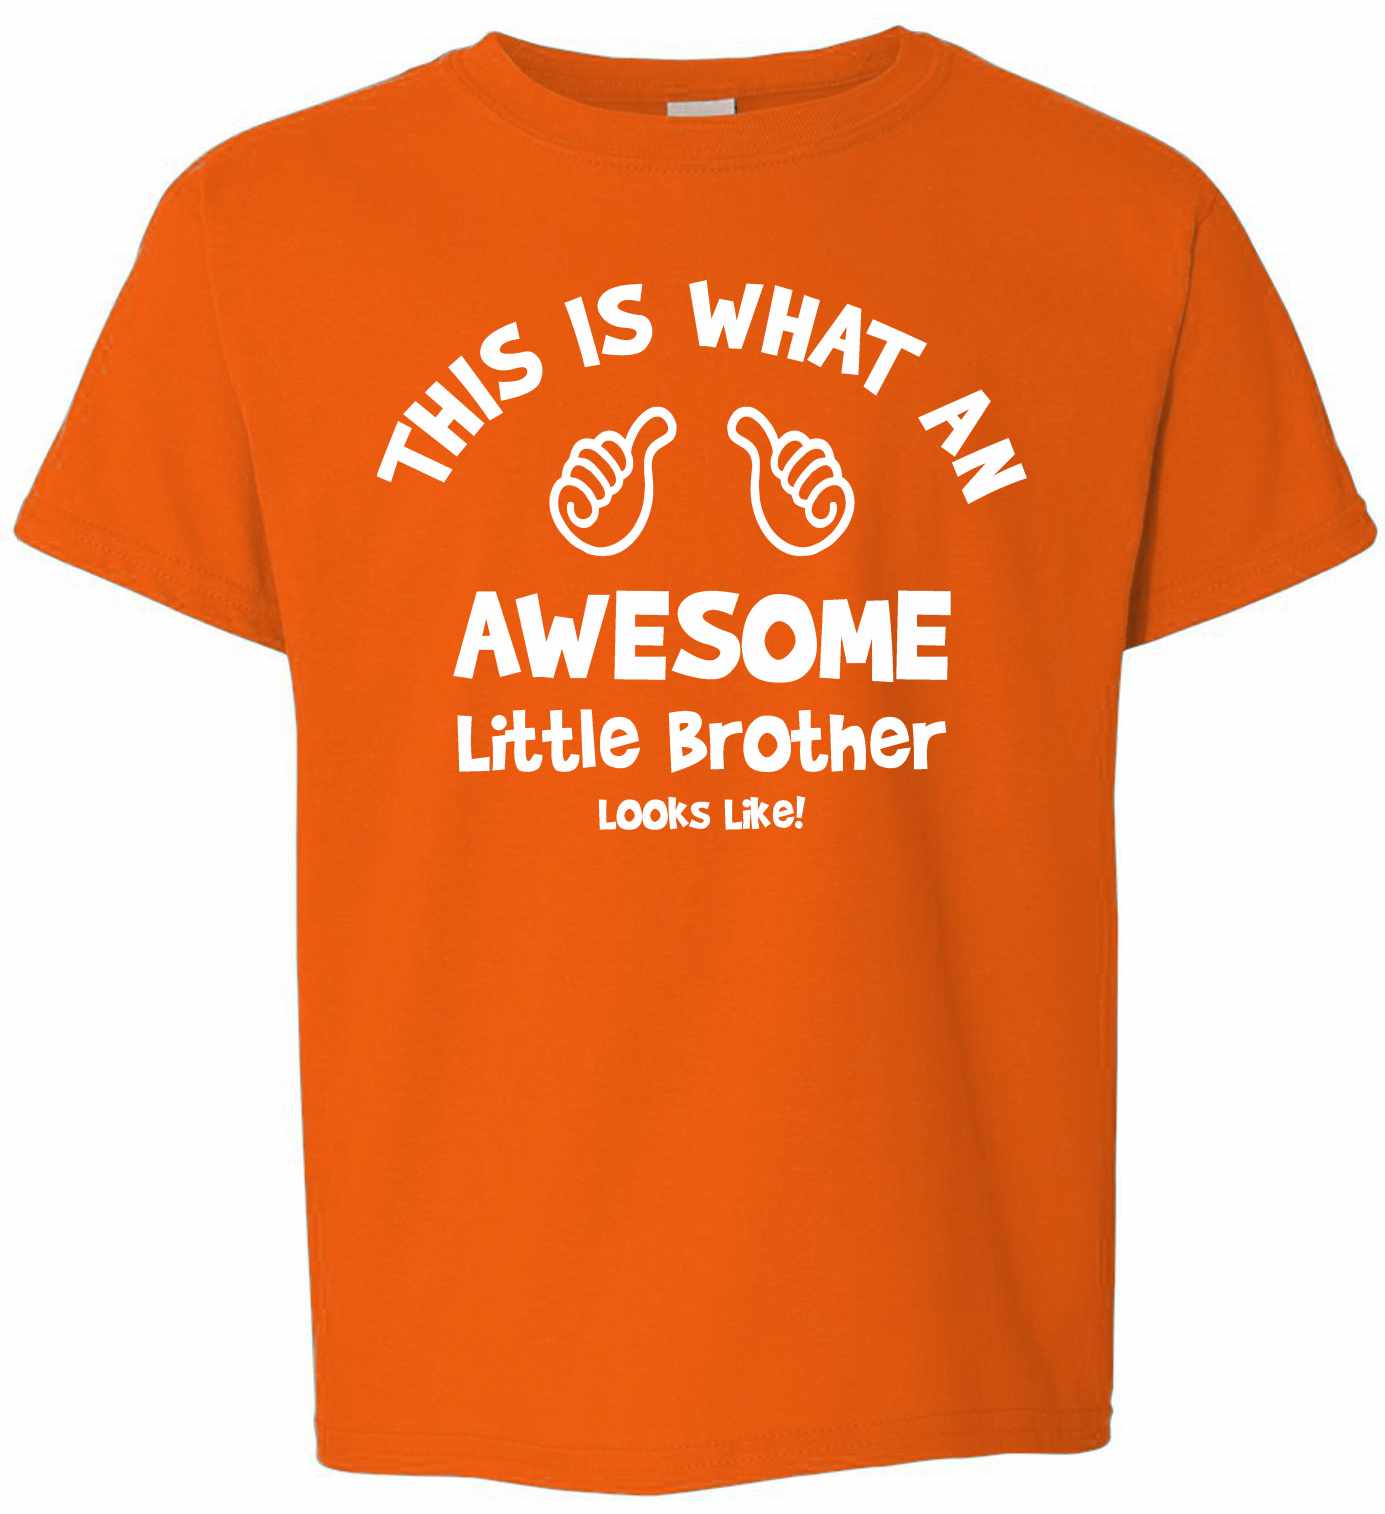 This is What an AWESOME LITTLE BROTHER Looks Like on Kids T-Shirt